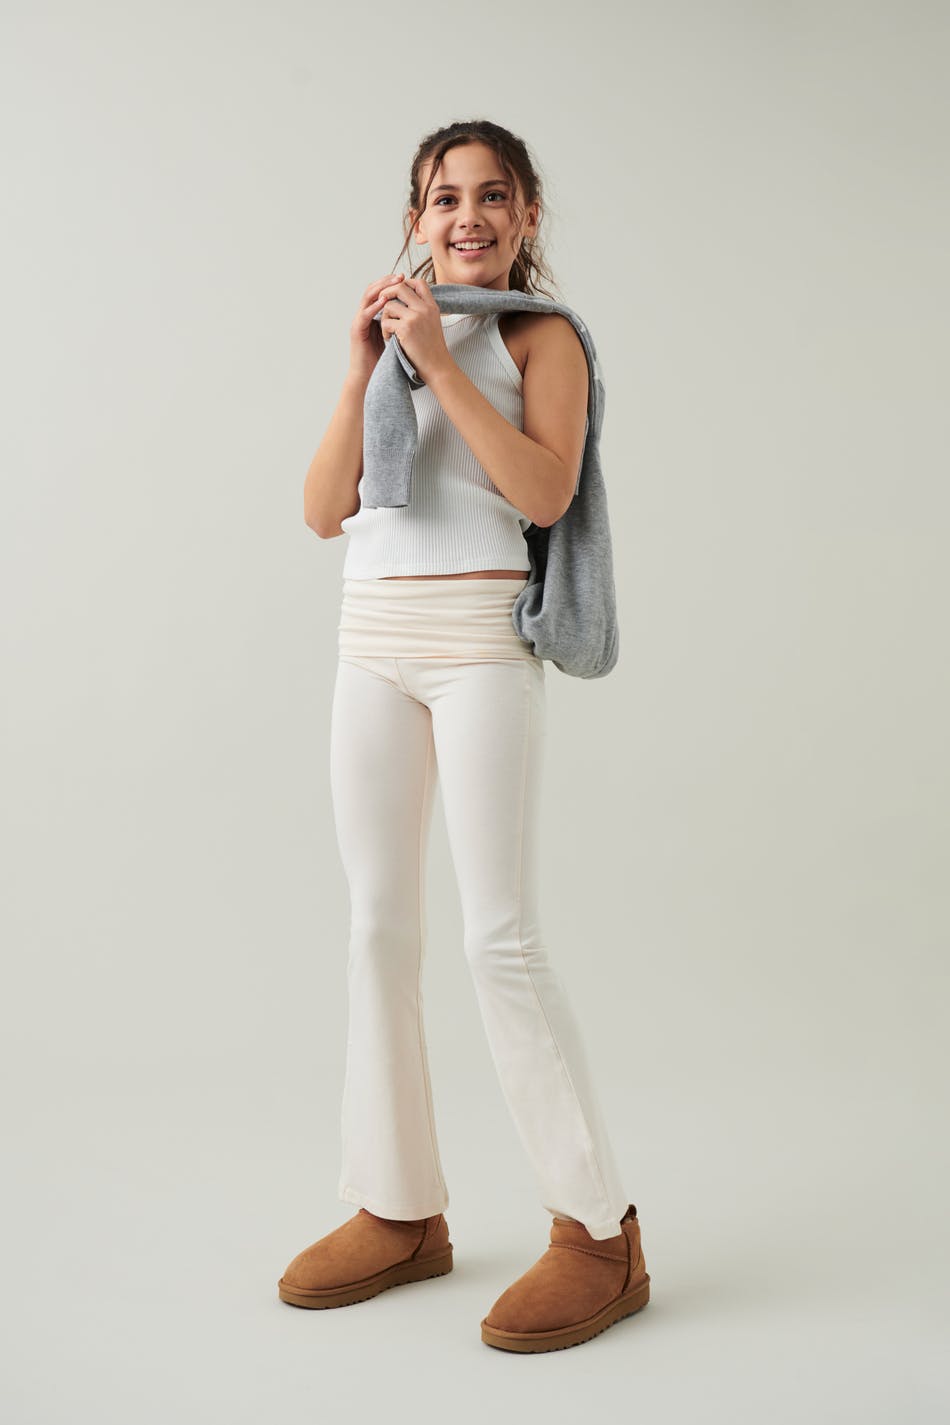 Leggings (Beige) from Gina Tricot